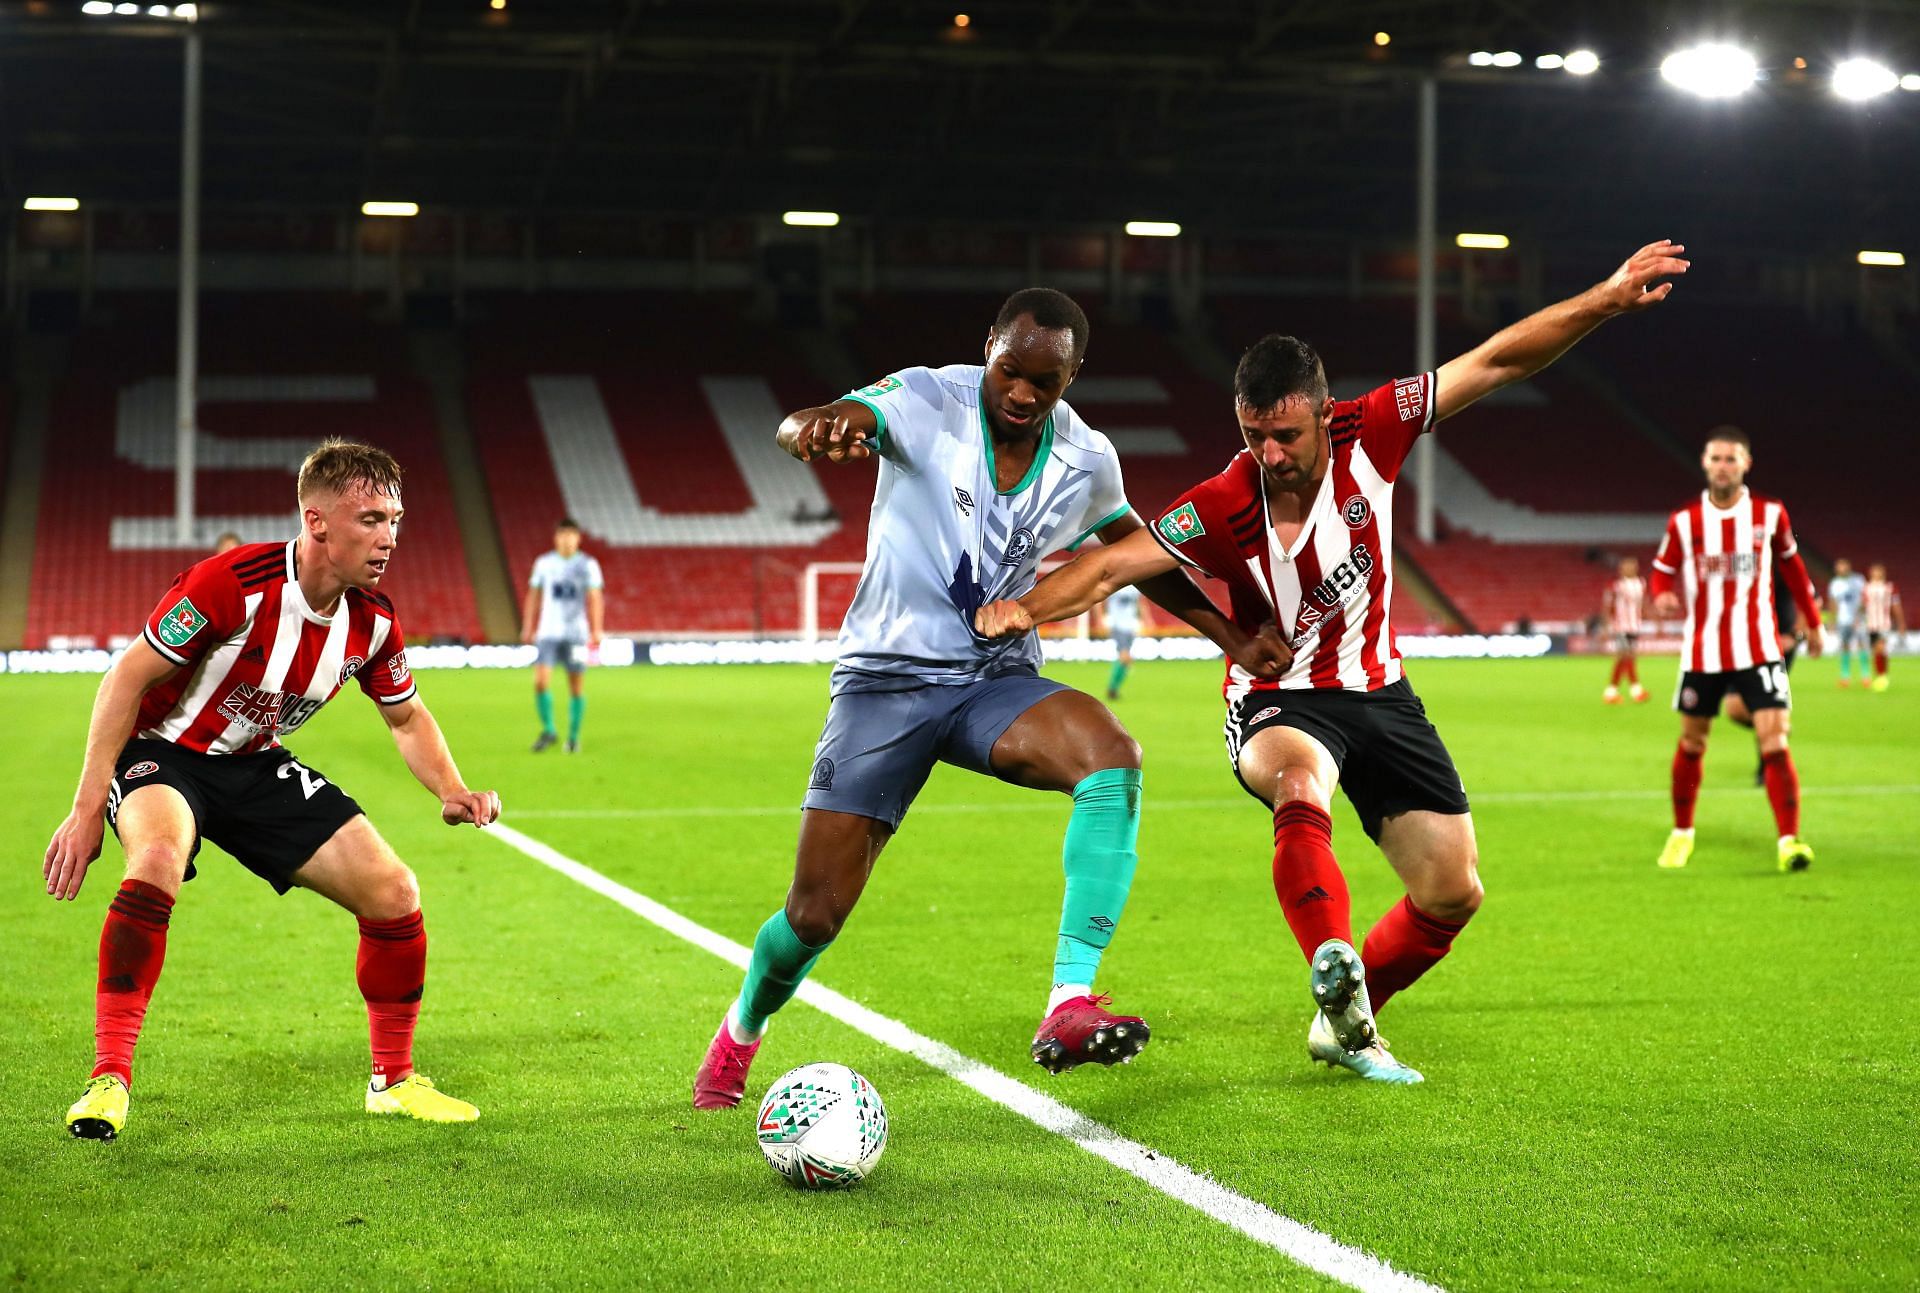 Sheffield United play host to Blackburn Rovers on Wednesday